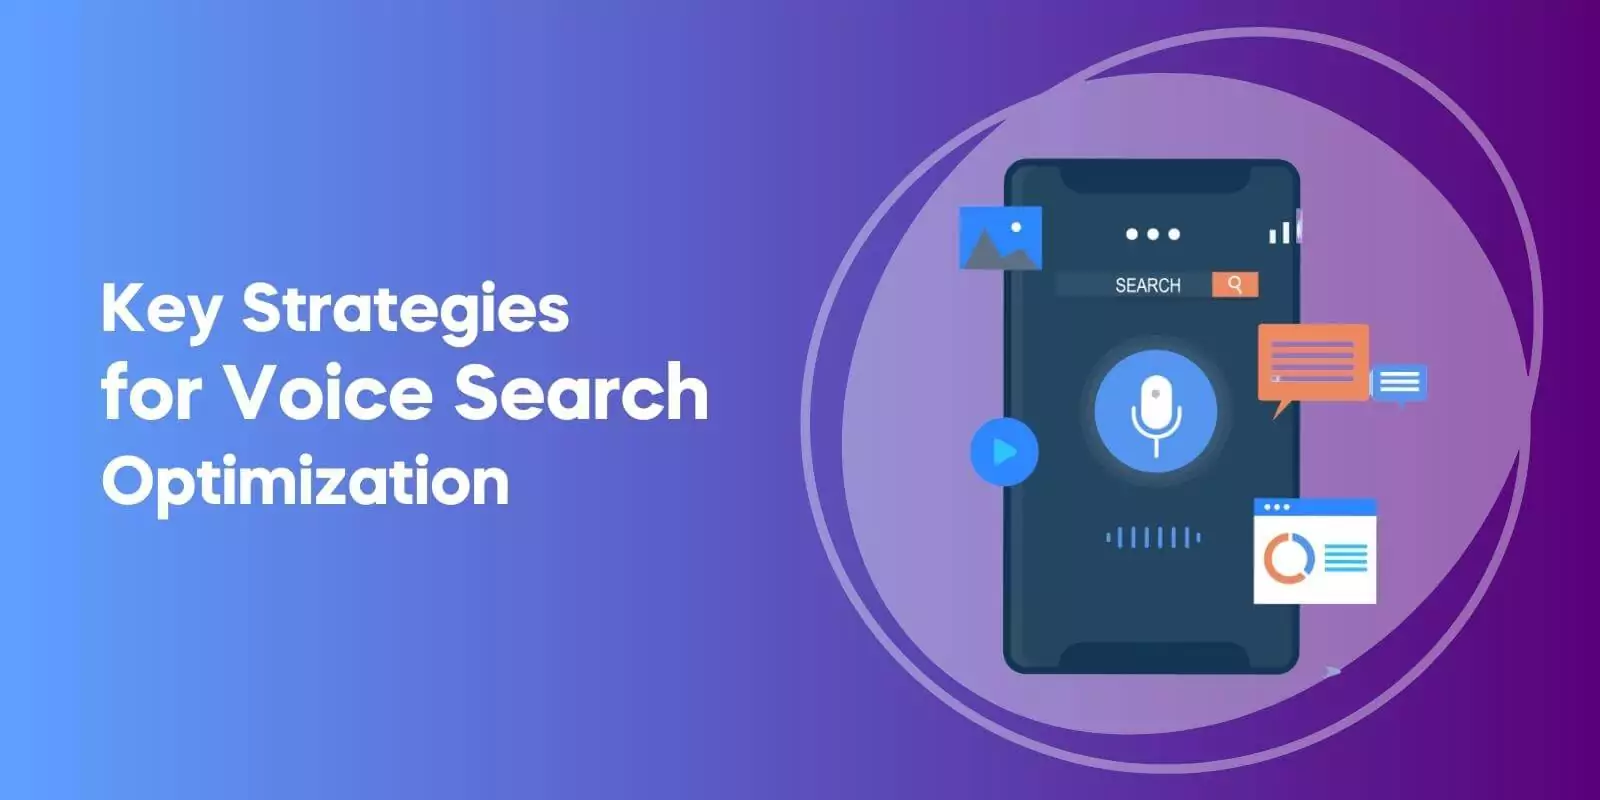 Key Strategies for Voice Search Optimization